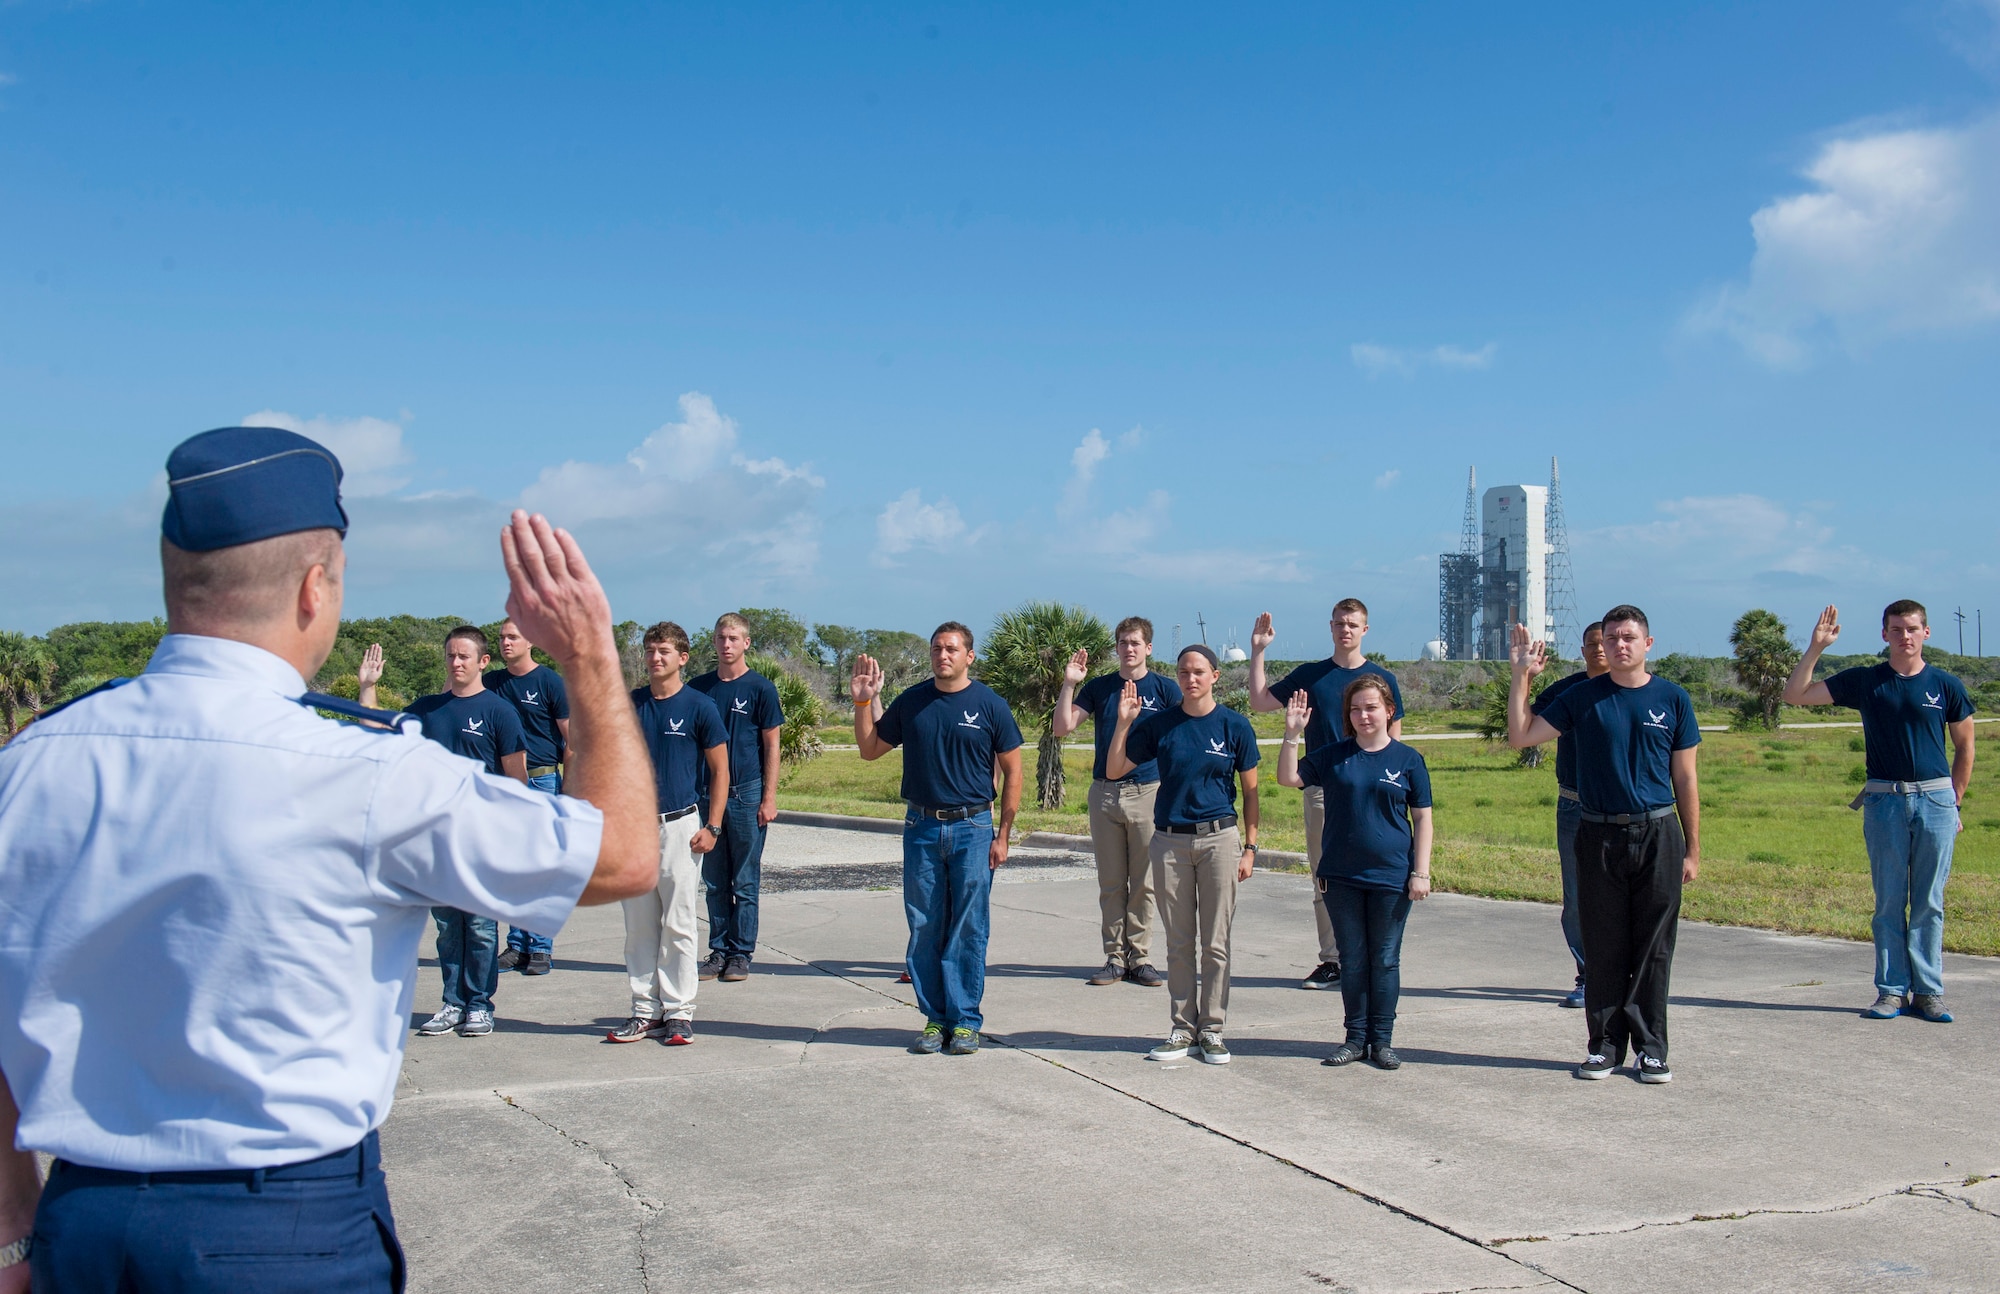 Thirteen U.S. Air Force recruits raise their right hand during a Delayed Entrance Program swear-in ceremony at Cape Canaveral Air Force Station, Fla., Complex 34, May 14, 2014. The Delayed Entrance Program is a program for recruits who have decided to enlist in the Air Force but have not been sent to basic training yet. (U.S. Air Force photo/Matthew Jurgens)